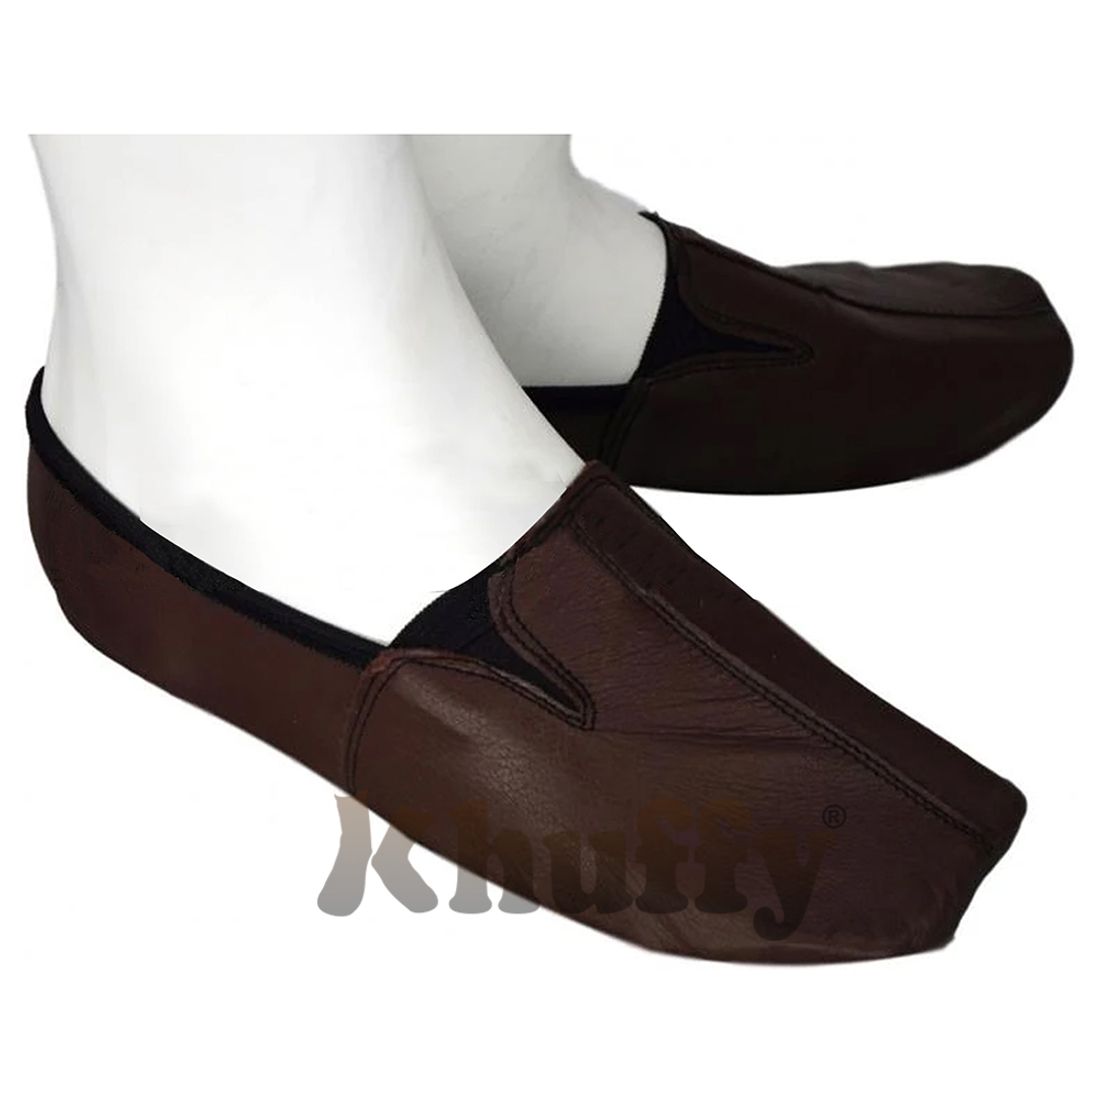 Chocolate Brown Men’s/Women’s Ankle Low-Cut Elastic Slip-On Halal Leather Sunnah Khuff Khuffain Socks for Mosque